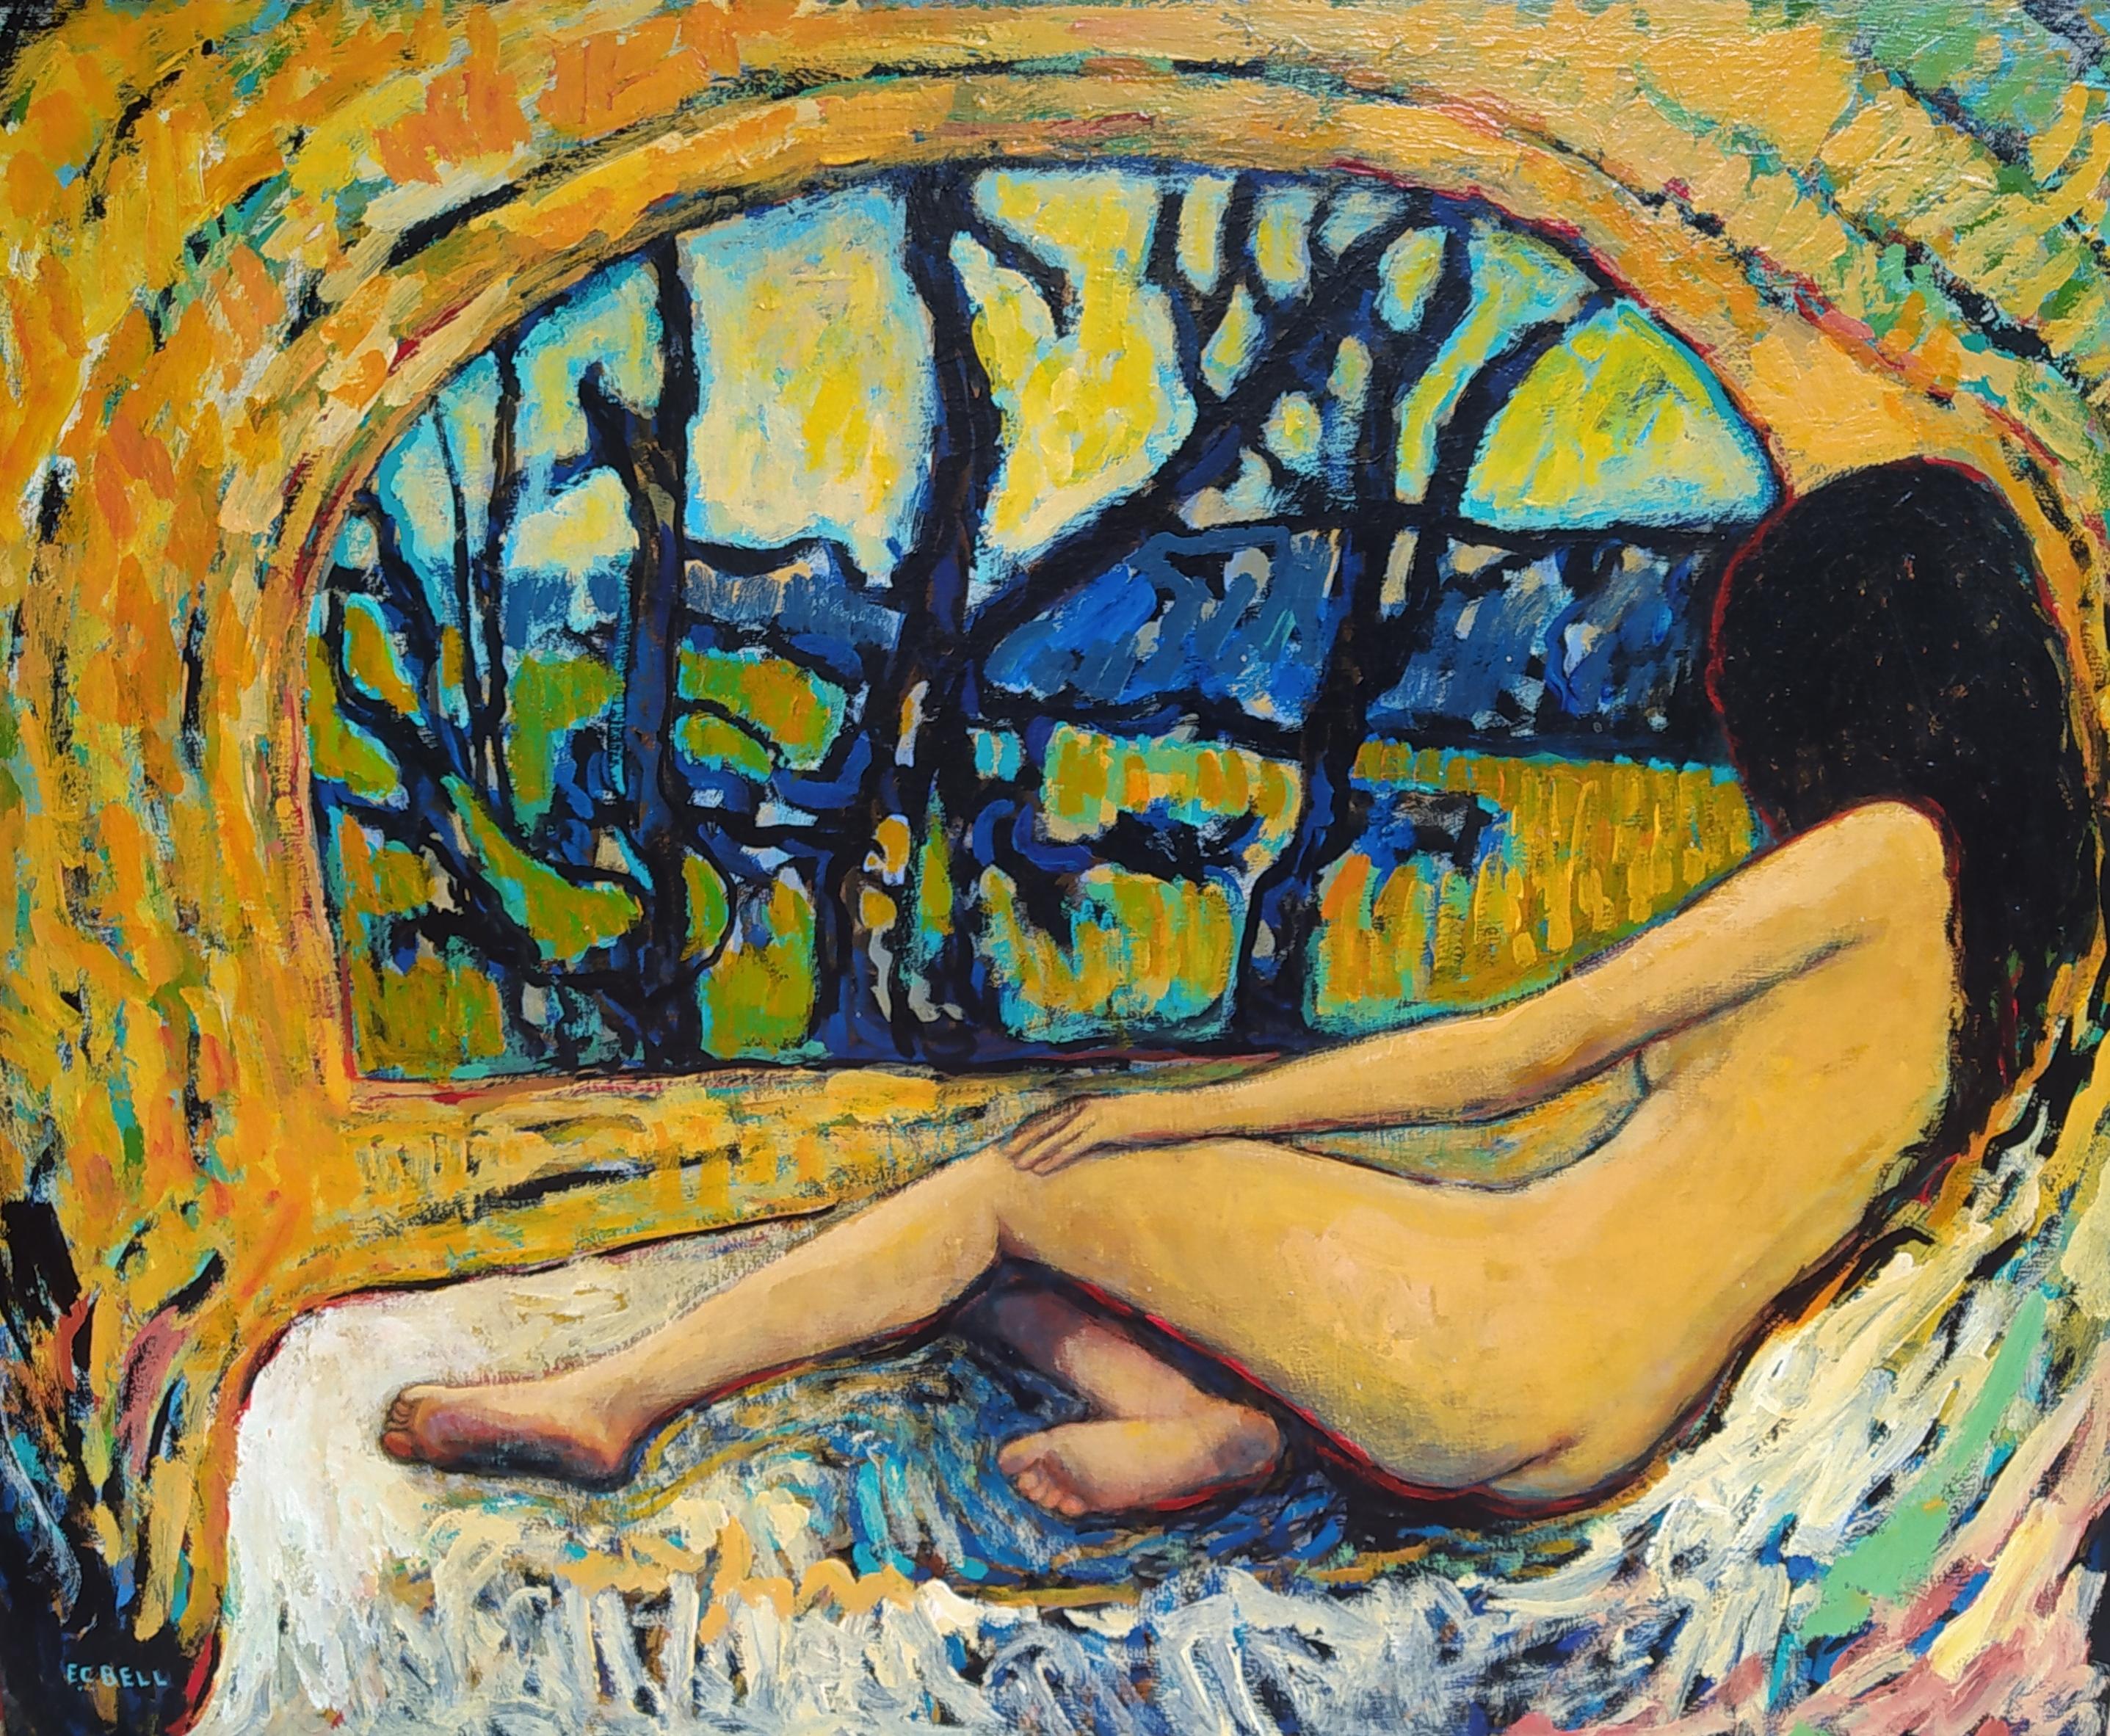 "Portal" - Horizontal expressionist landscape with female nude.